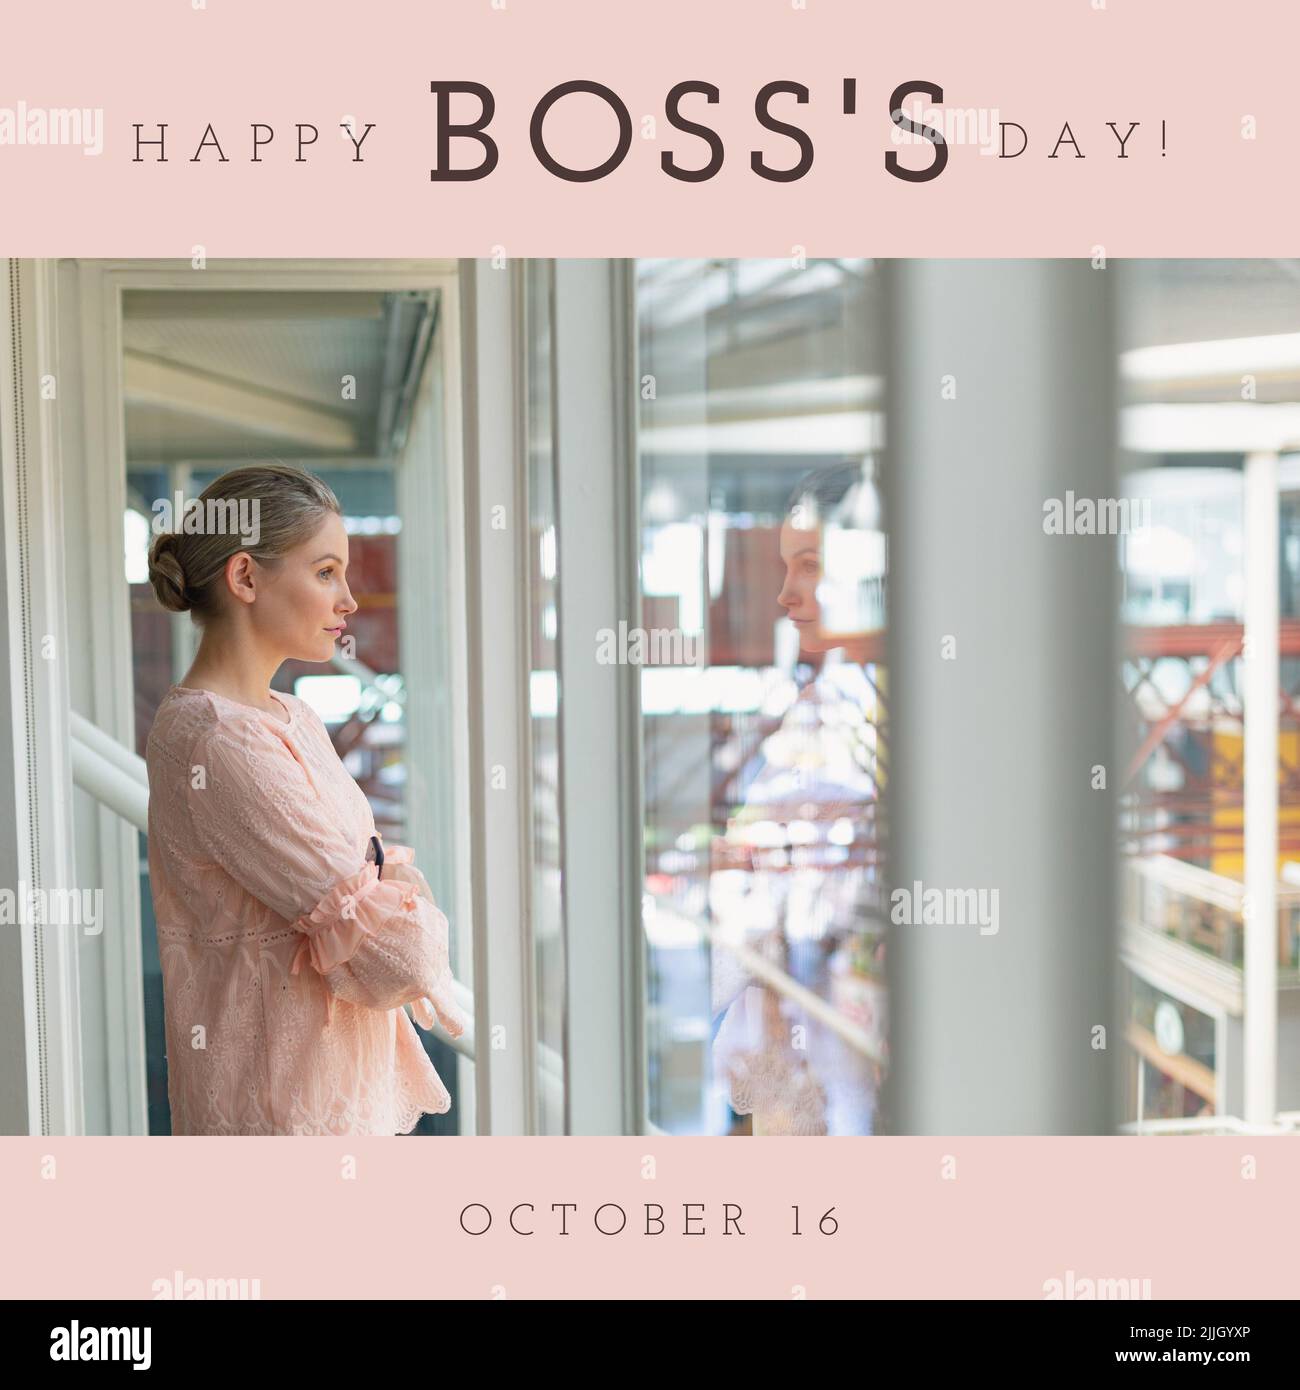 Image of happy boss day over of caucasian woman looking outside window in office Stock Photo